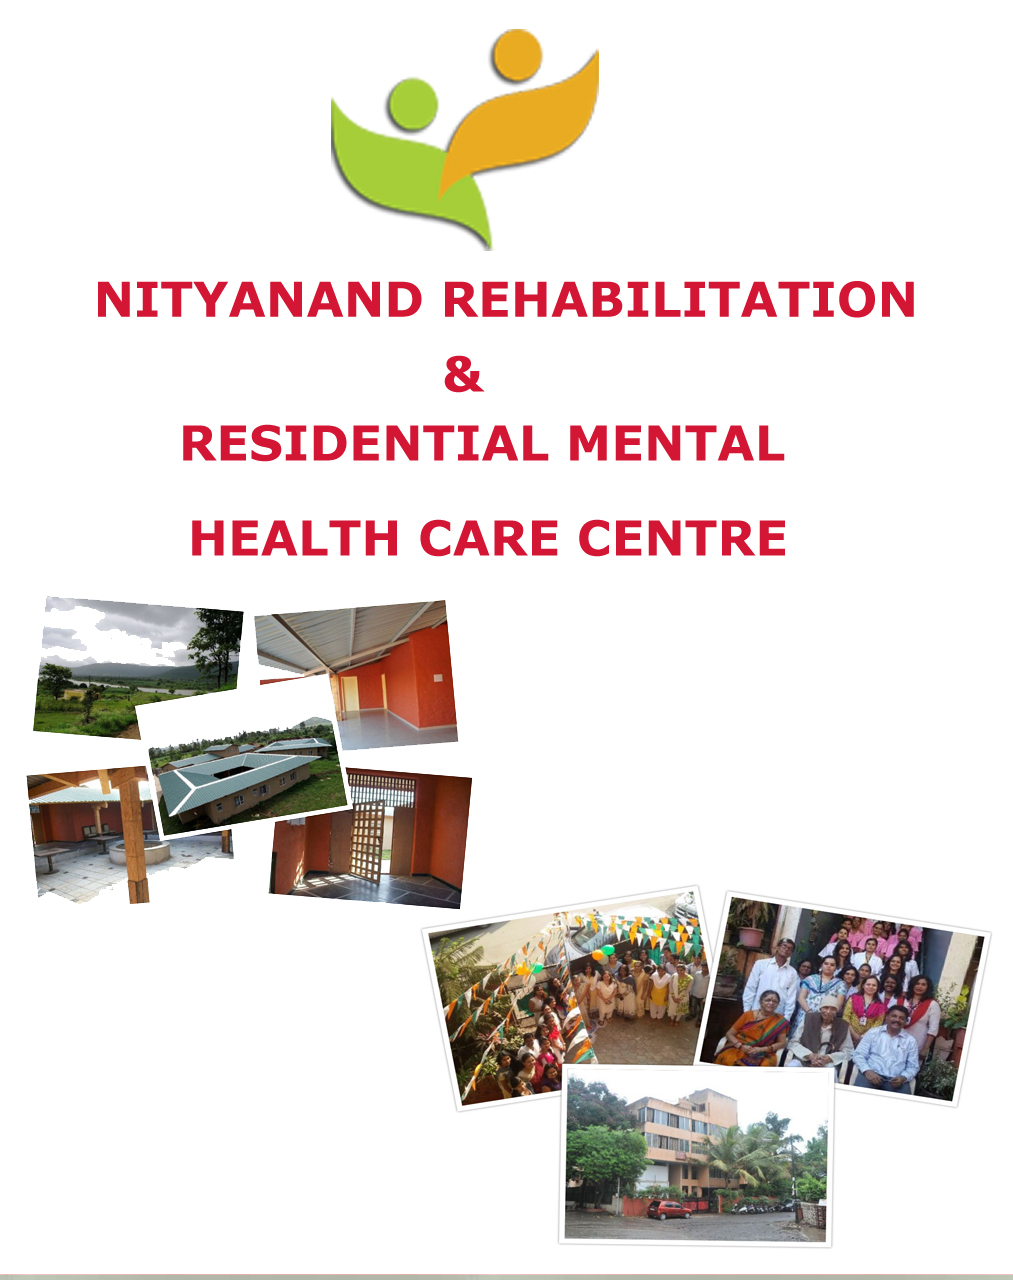 NITYANAND REHABILITATION & RESIDENTIAL MENTAL HEALTH CARE CENTRE